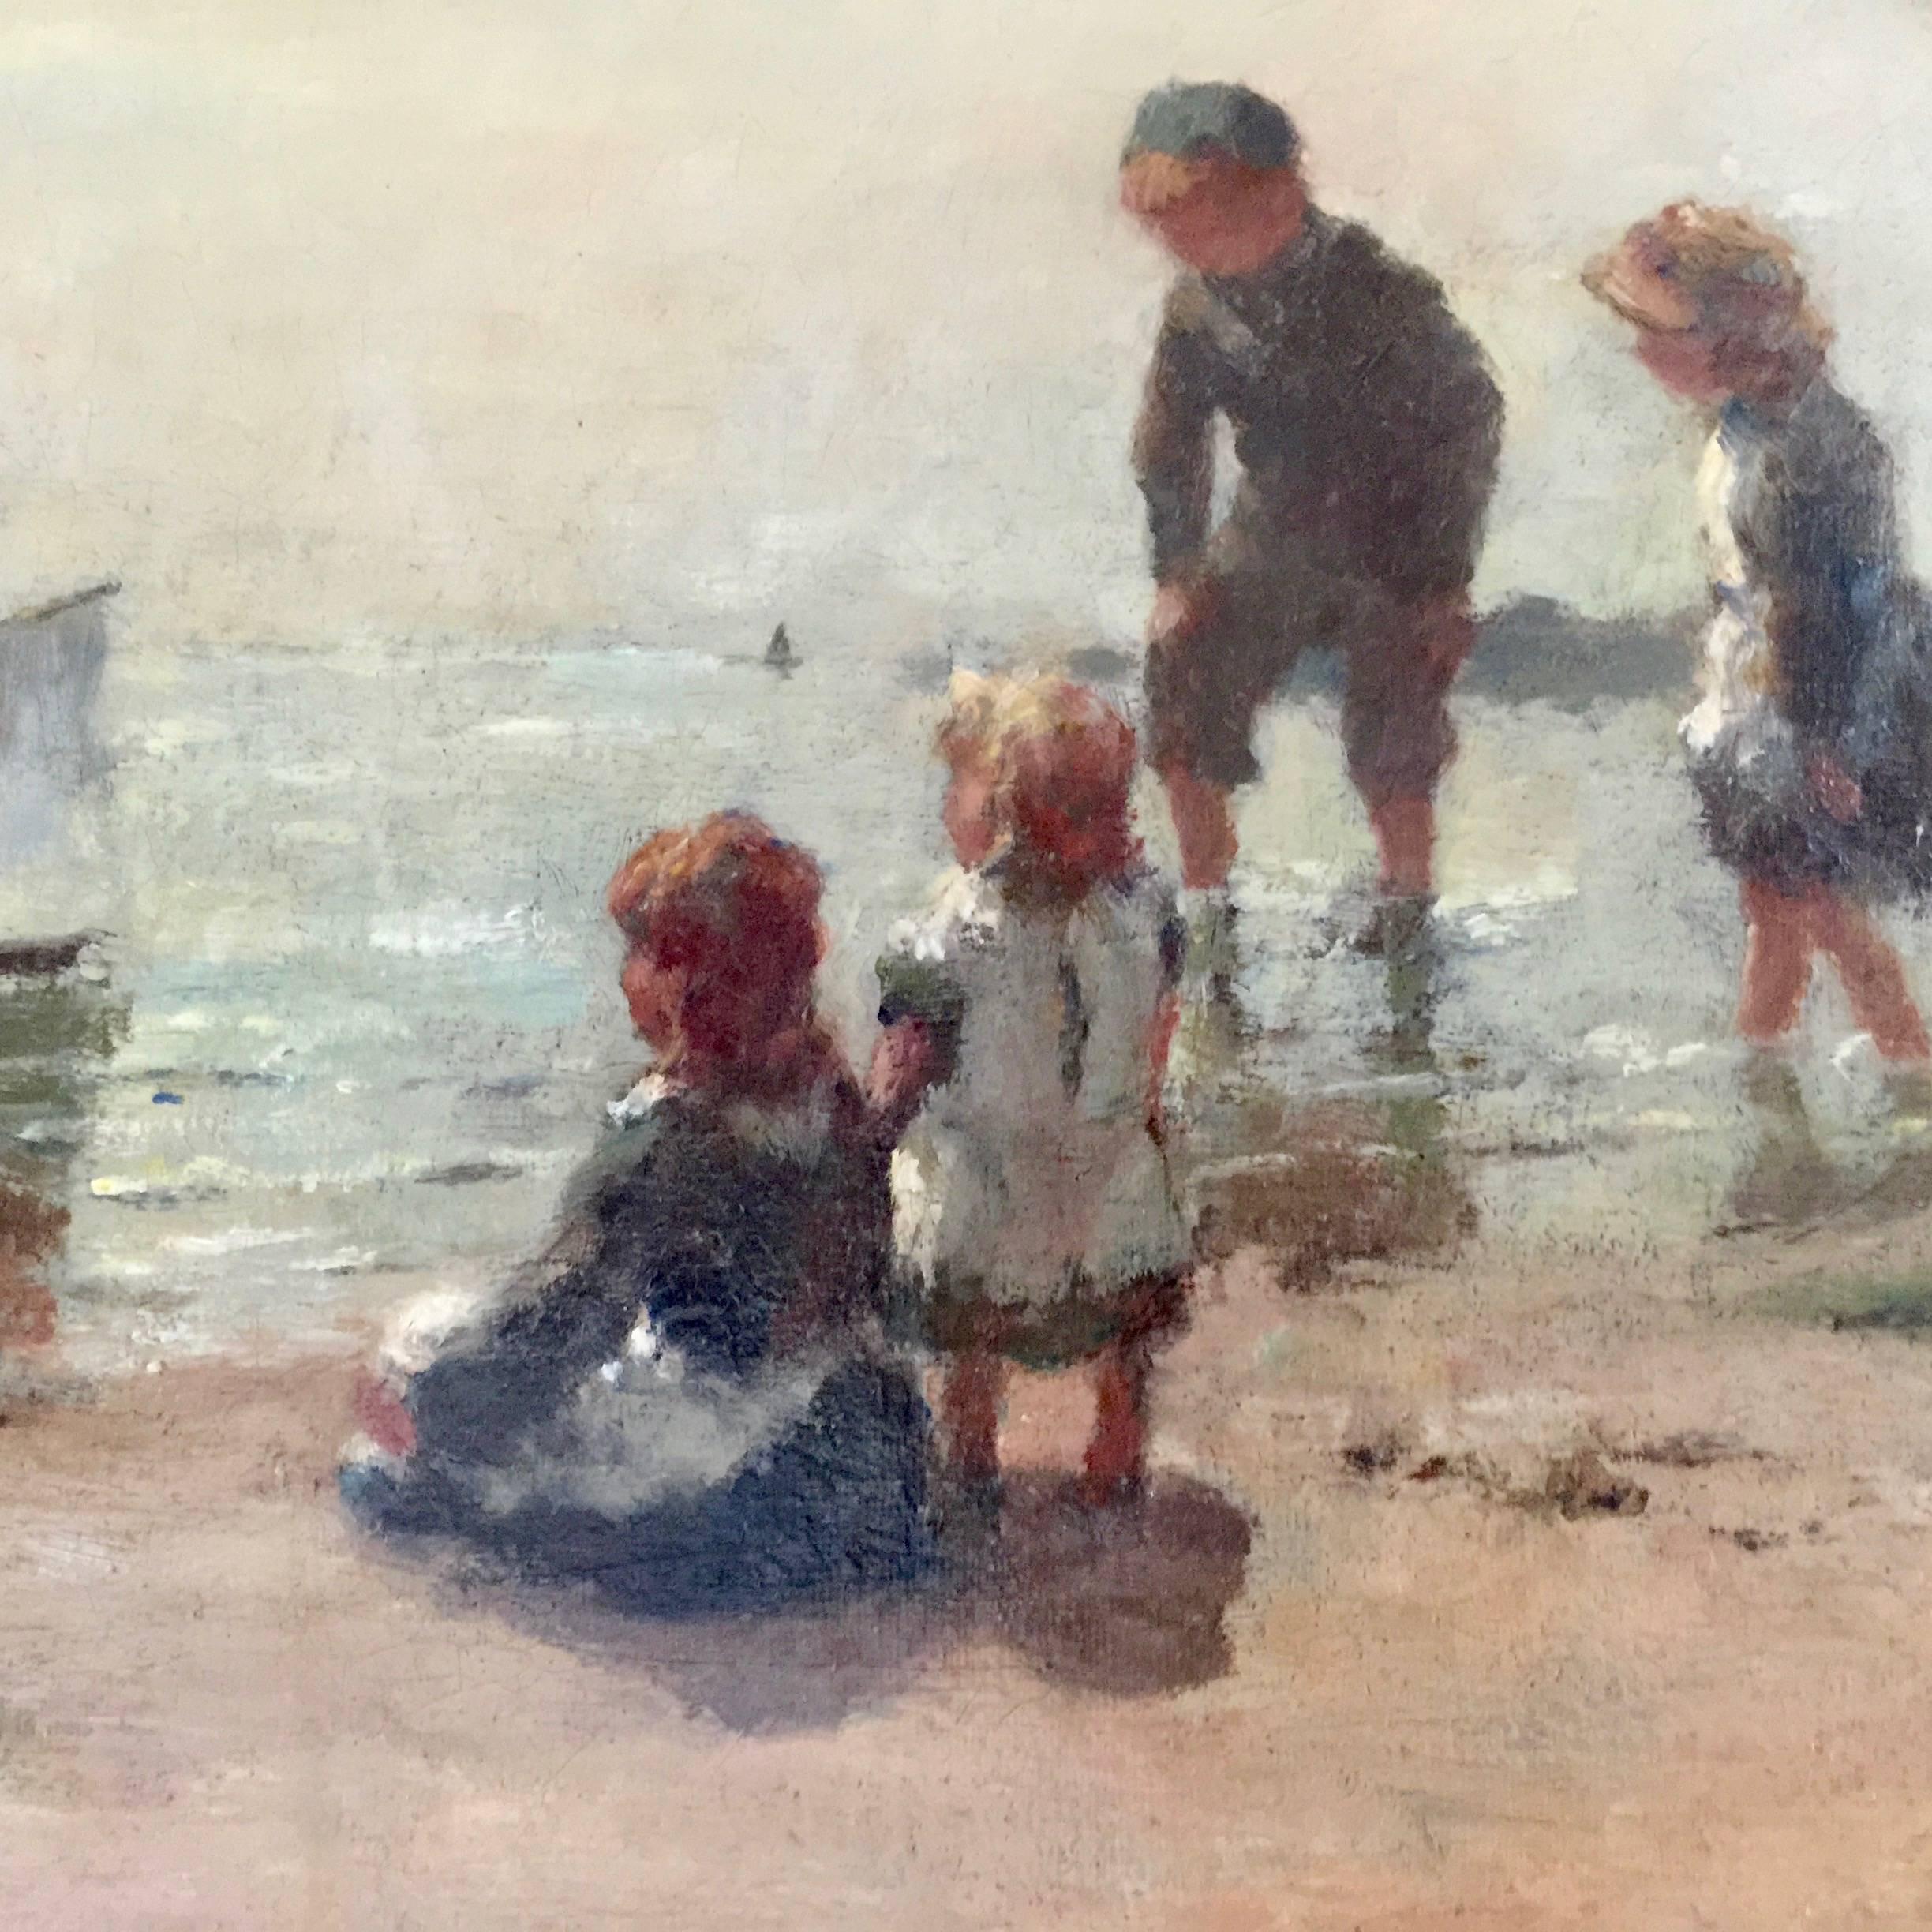 Young Scottish Children Playing by the Sea Shore - Impressionist Painting by James Alick Riddel